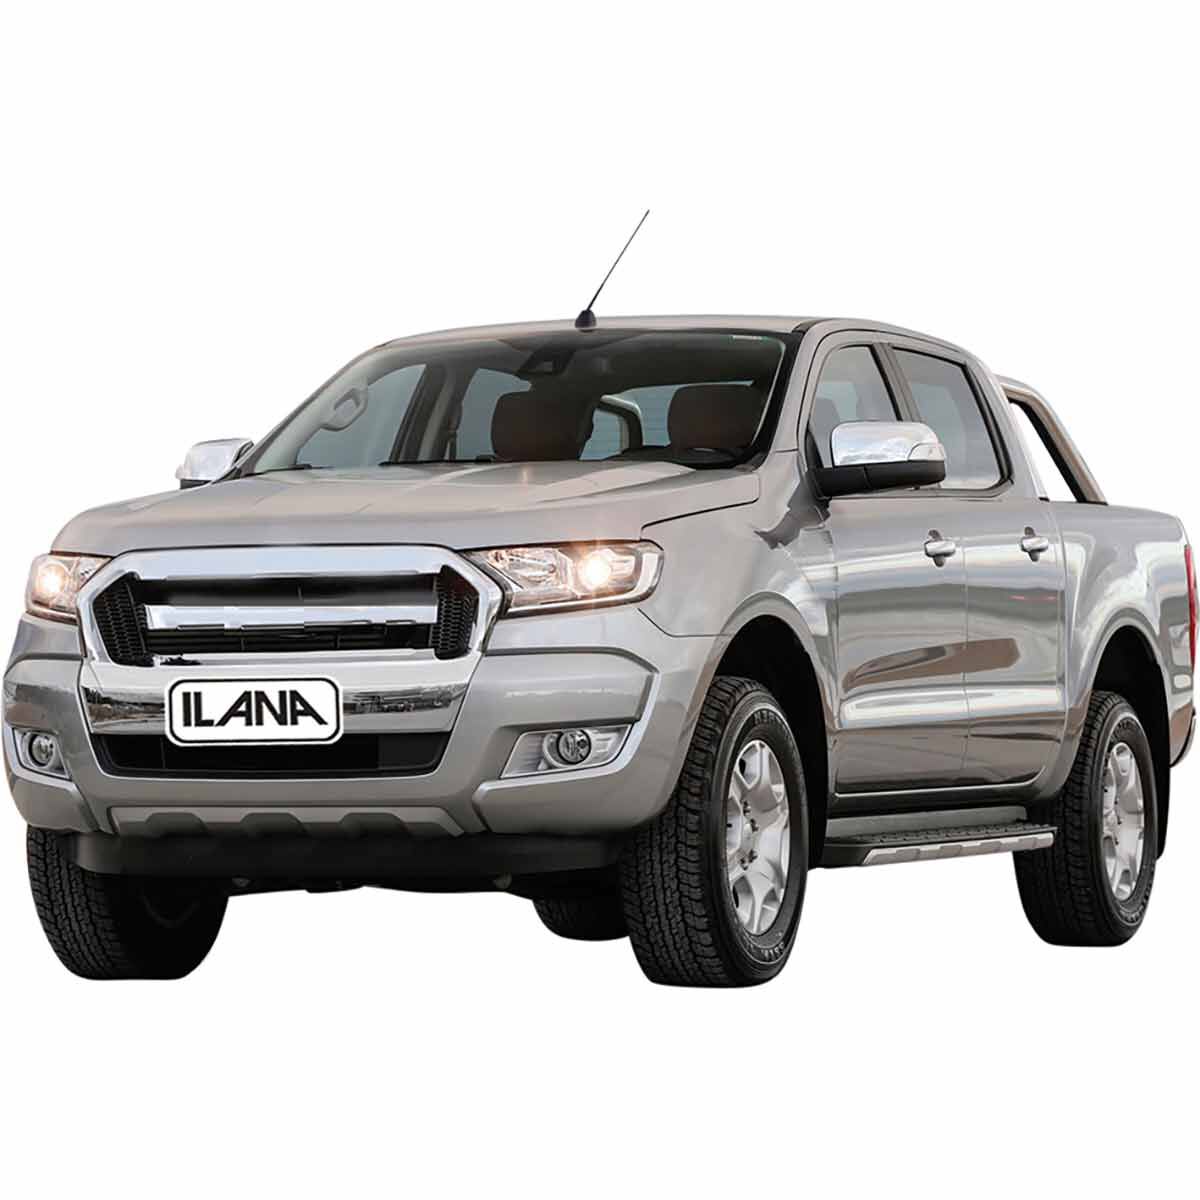 Ilana Horizon Tailor Made Pack for Ford Ranger PX MKII Dual Cab 06/15+, , scaau_hi-res